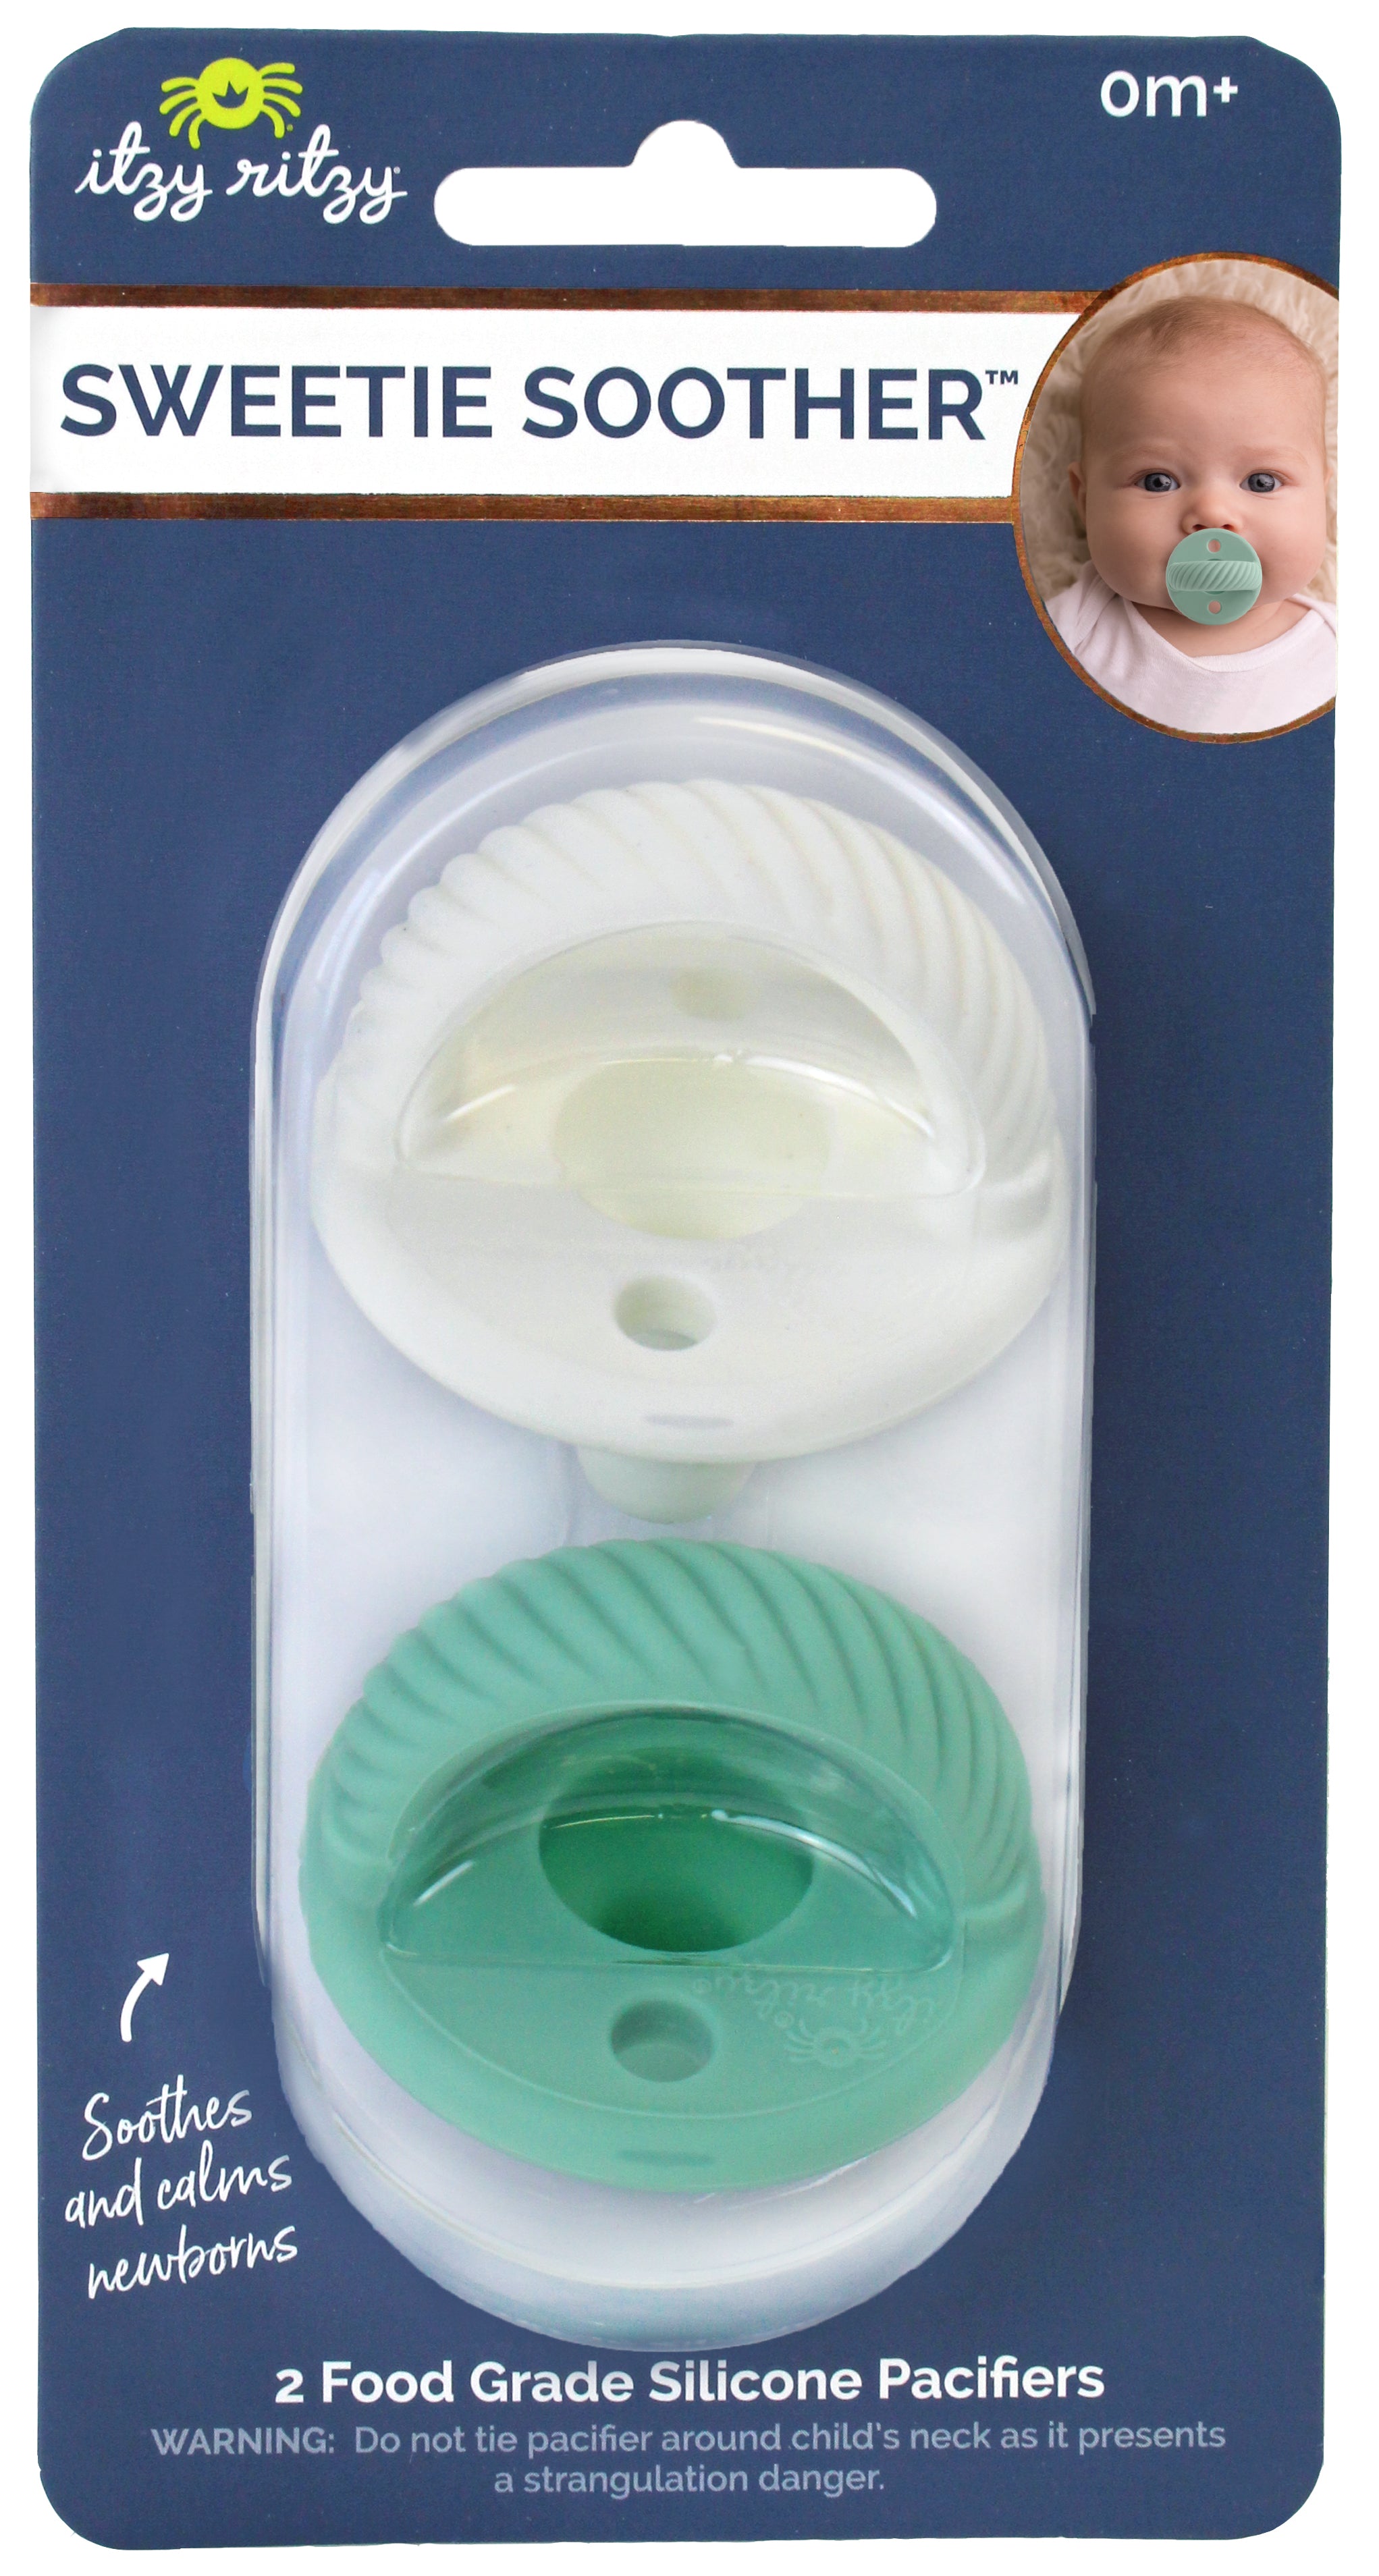 Newborn Infant Baby Itzy Ritzy 2pk Mint White Cables Sweetie Soother Pacifiers. Jedbaby